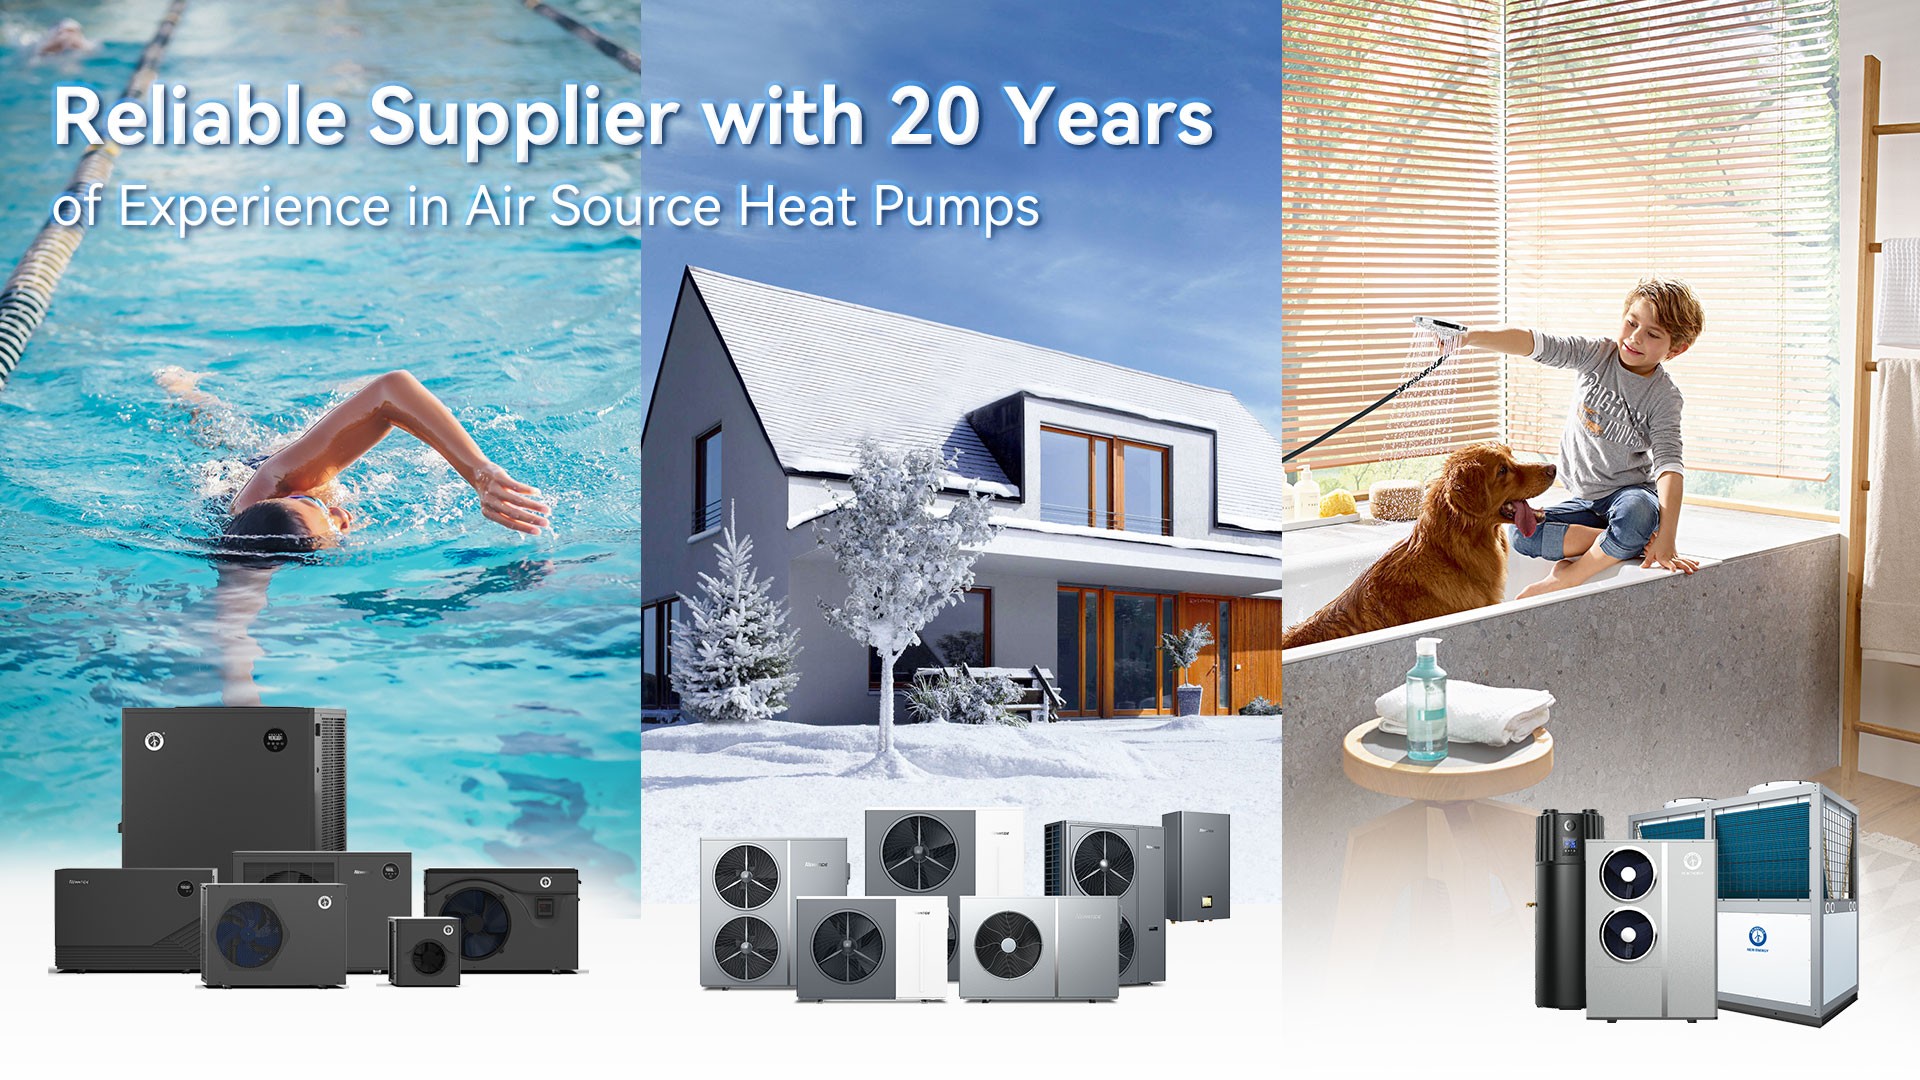 Reliable Supplier with 20 Years of Experience in Air Source Heat Pumps